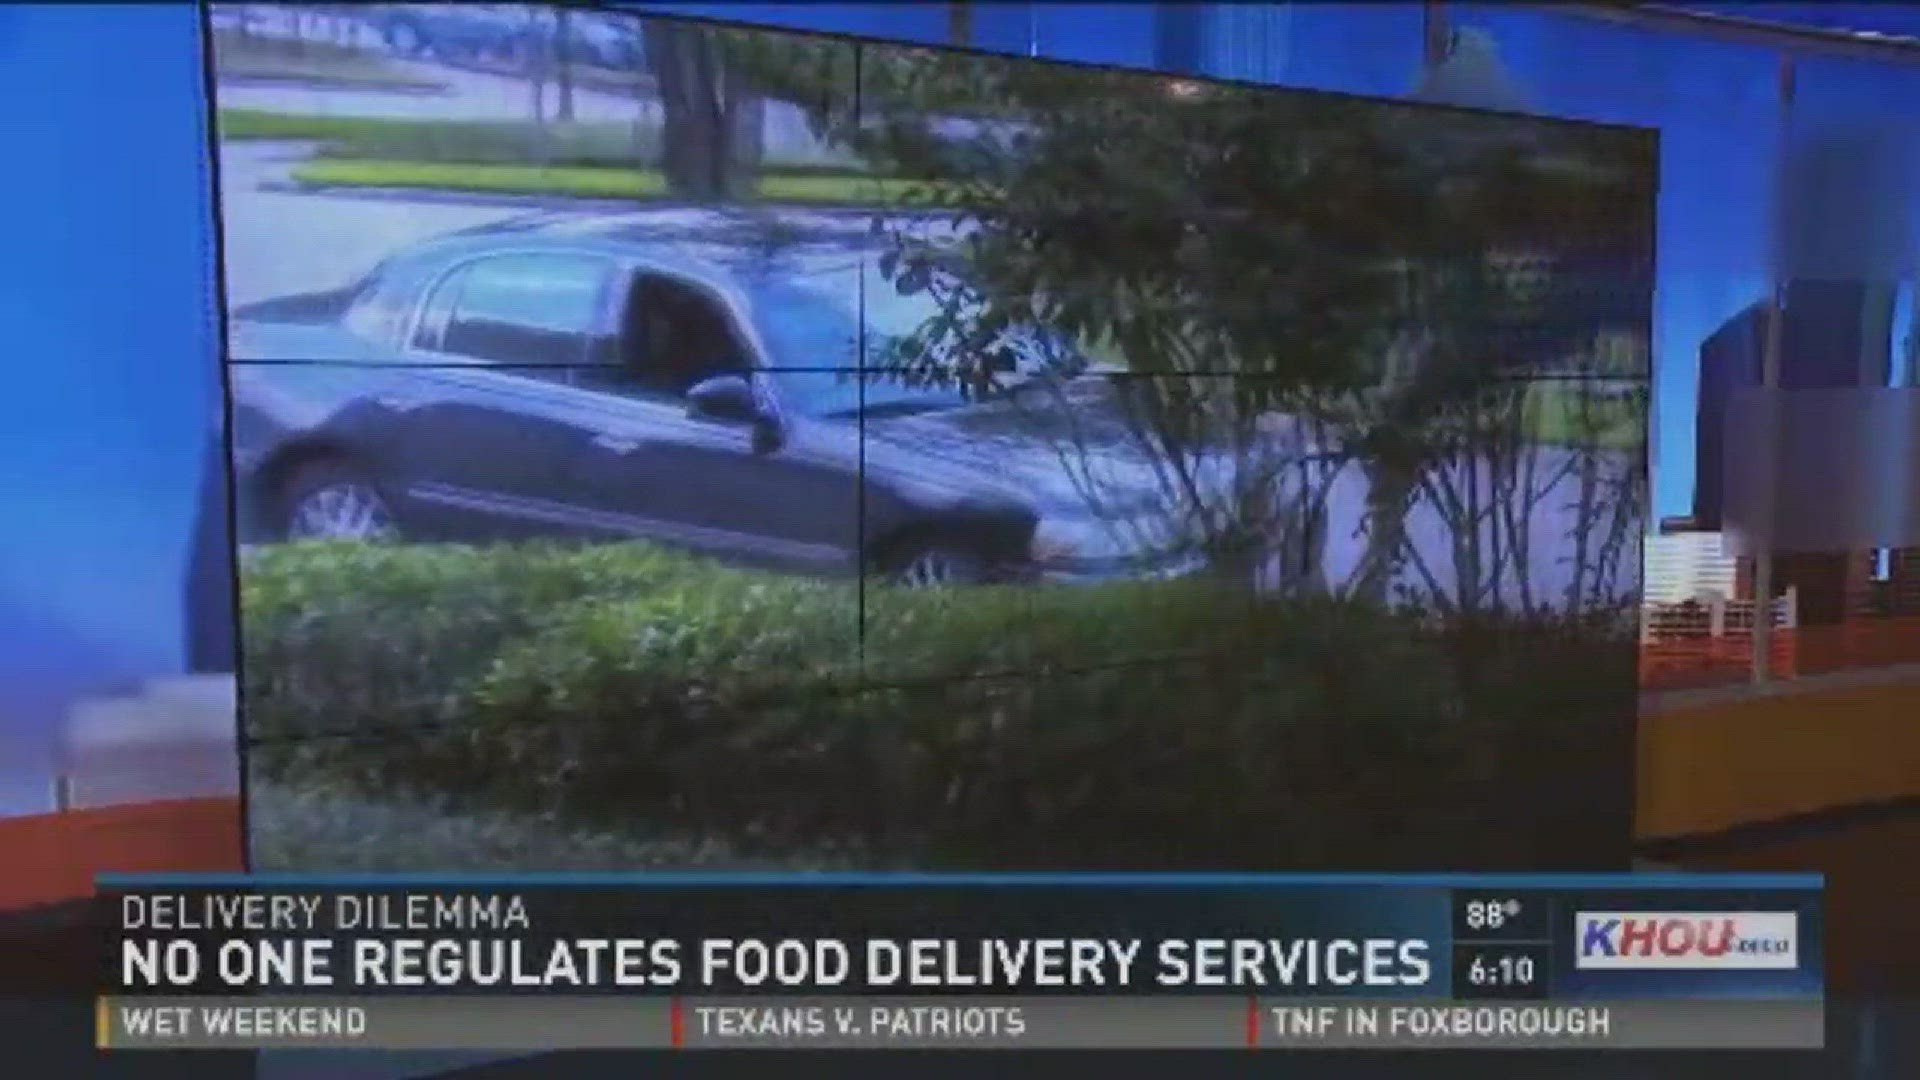 There are no specific regulations on popular food delivery apps in the state of Texas. The Texas Restaurant Association is now taking a closer look at the issue.